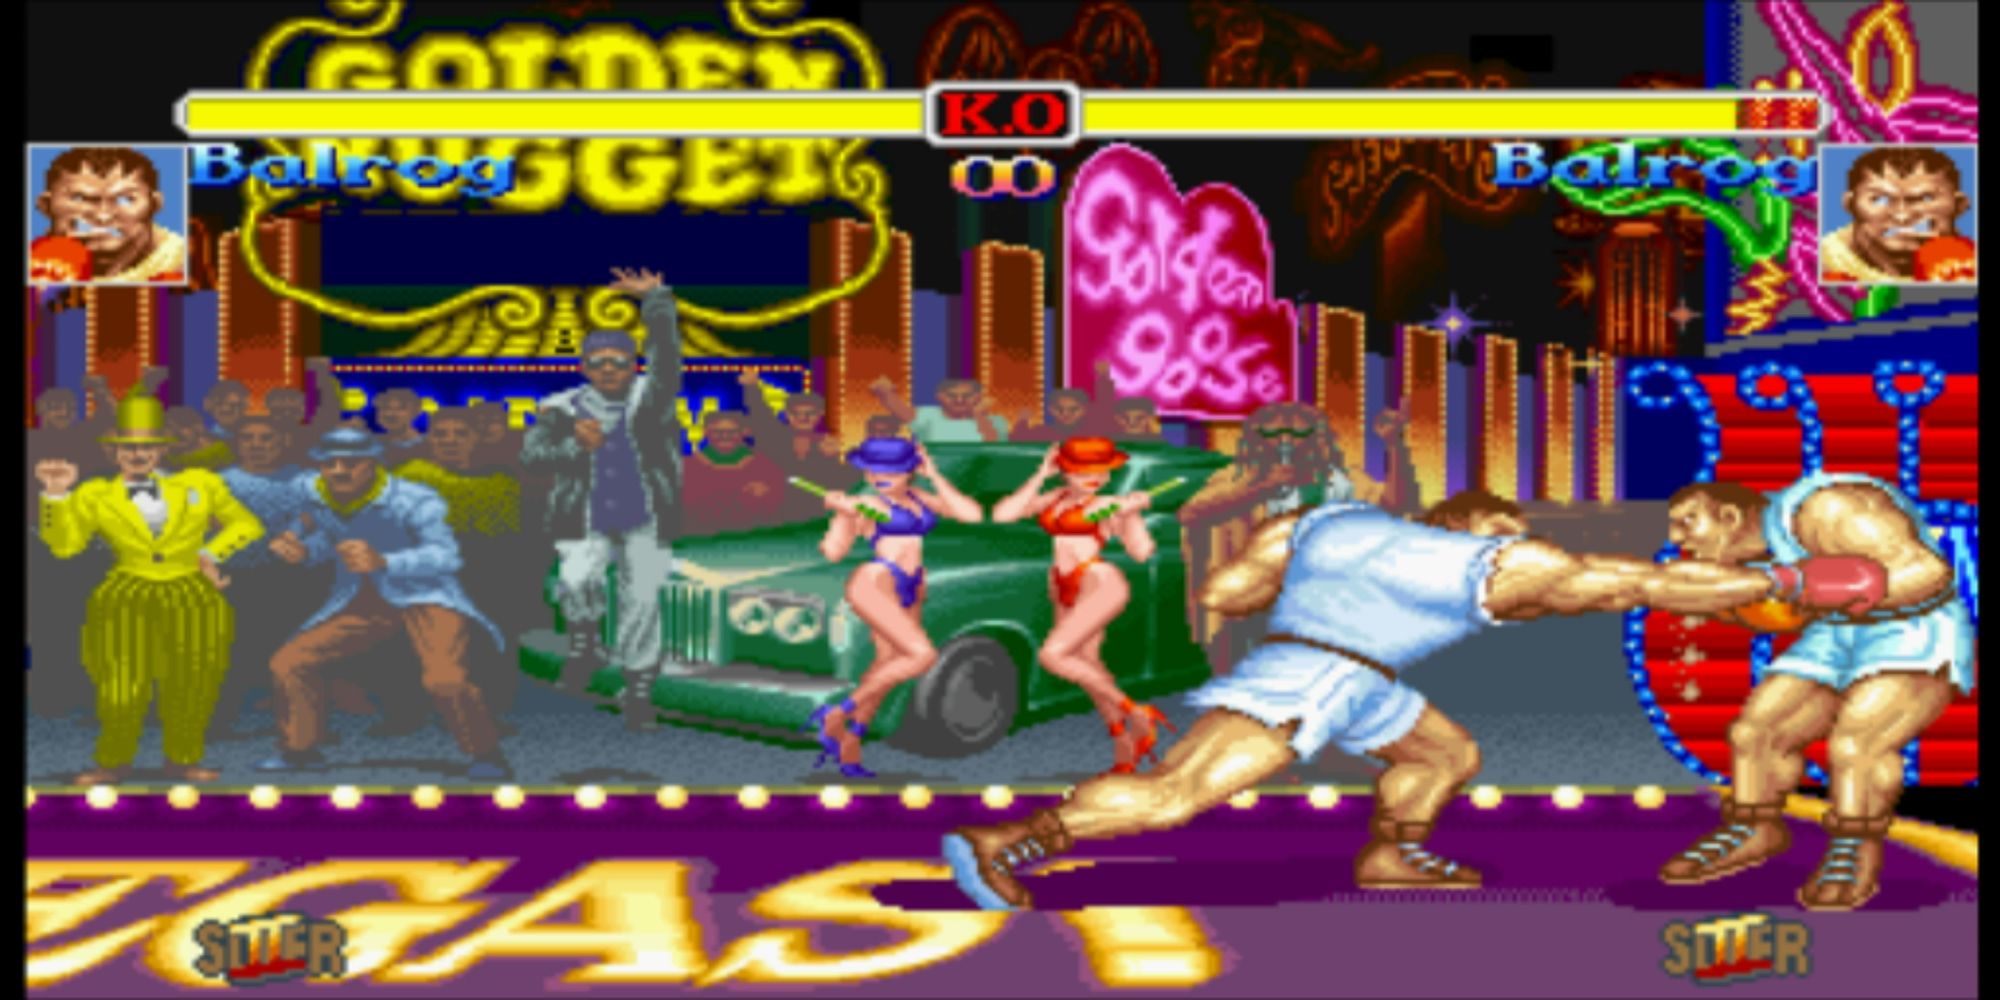 Super SF2 Balrog punches out Balrog at the High Roller Casino in Hyper Street Fighter 2.